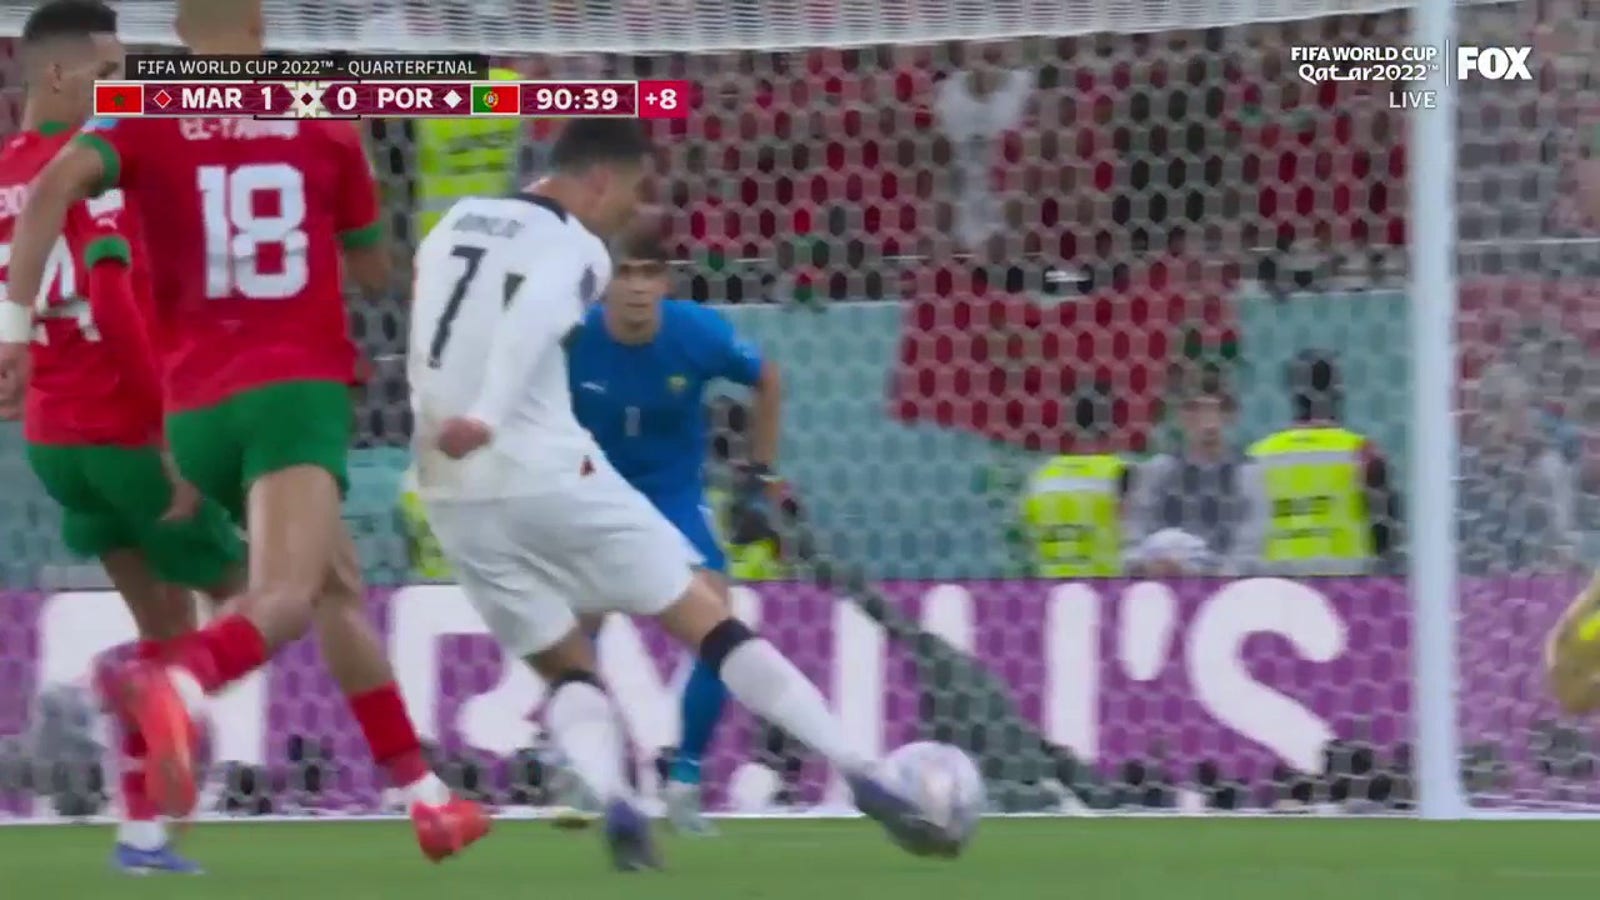 Cristiano Ronaldo came this close to playing for Portugal